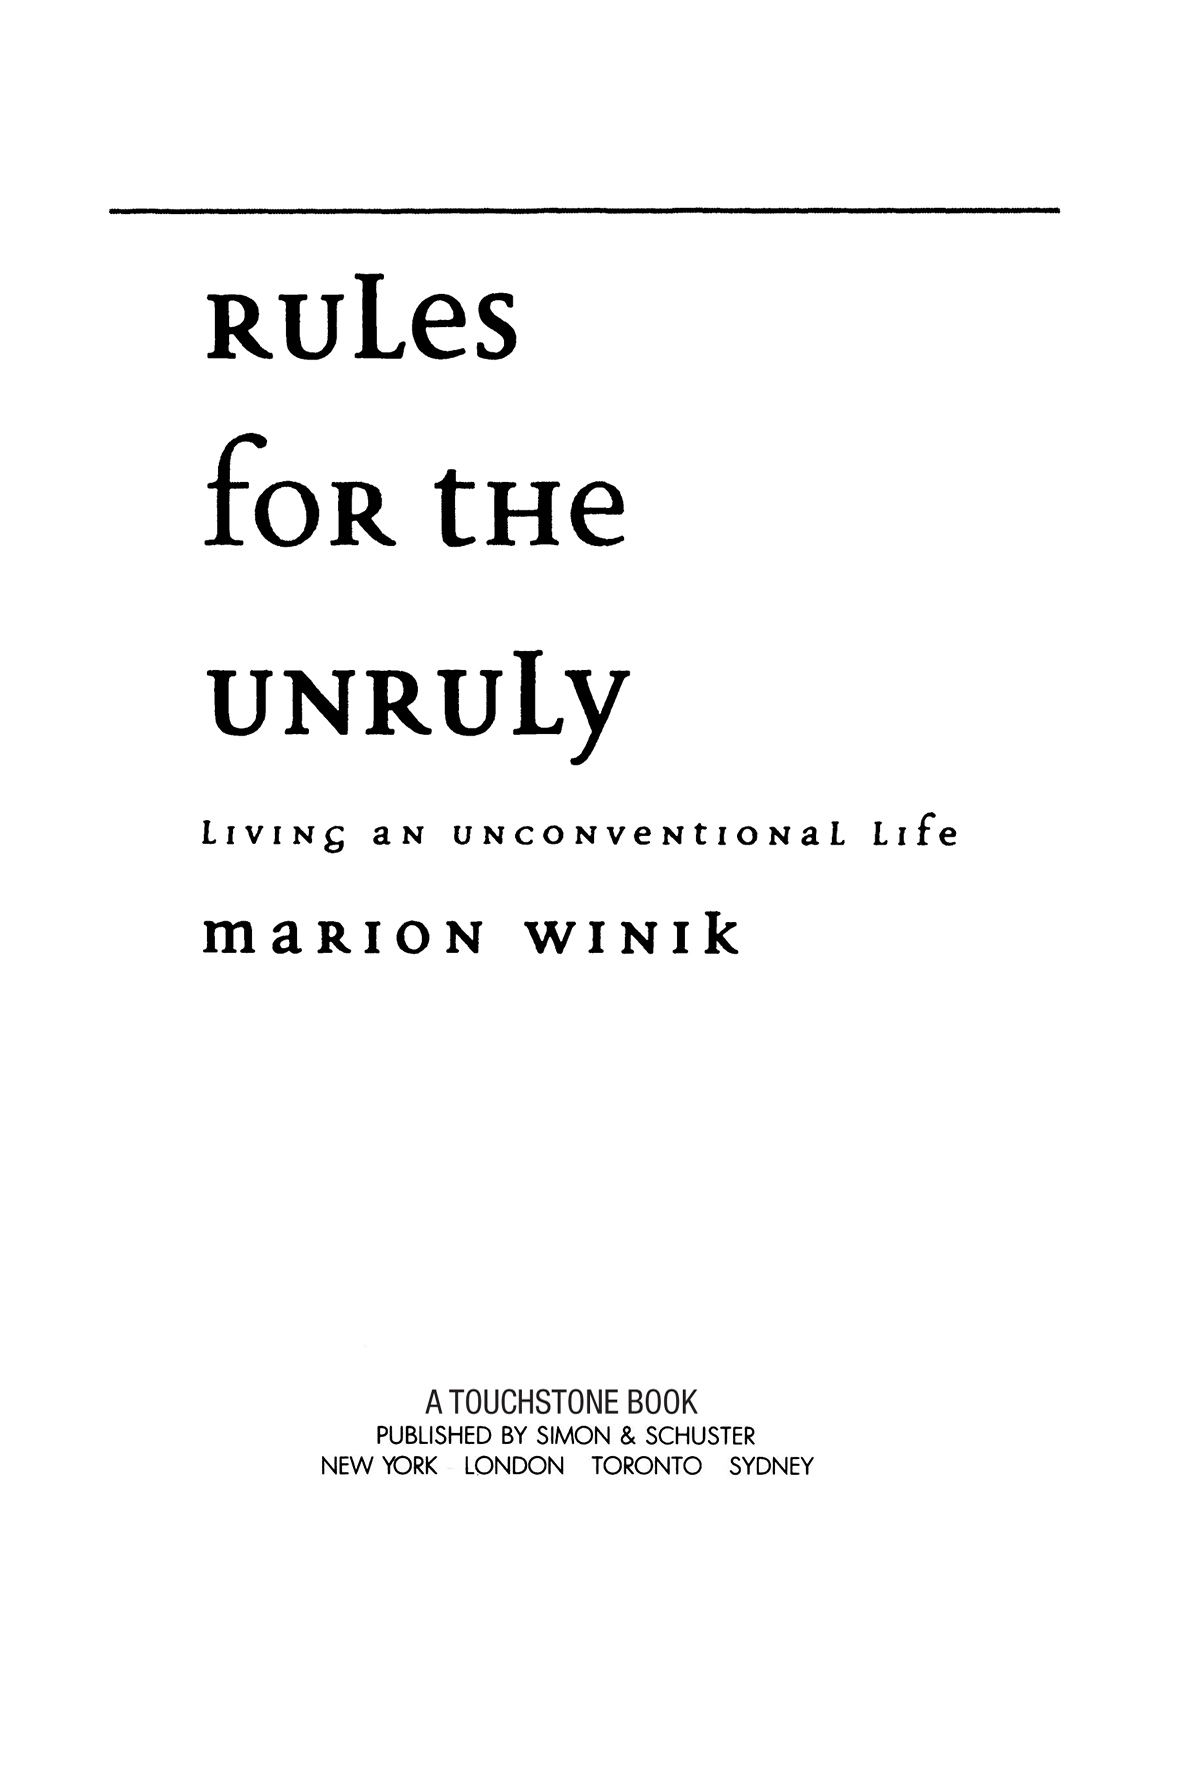 Rules for the Unruly Living an Unconventional Life - image 1